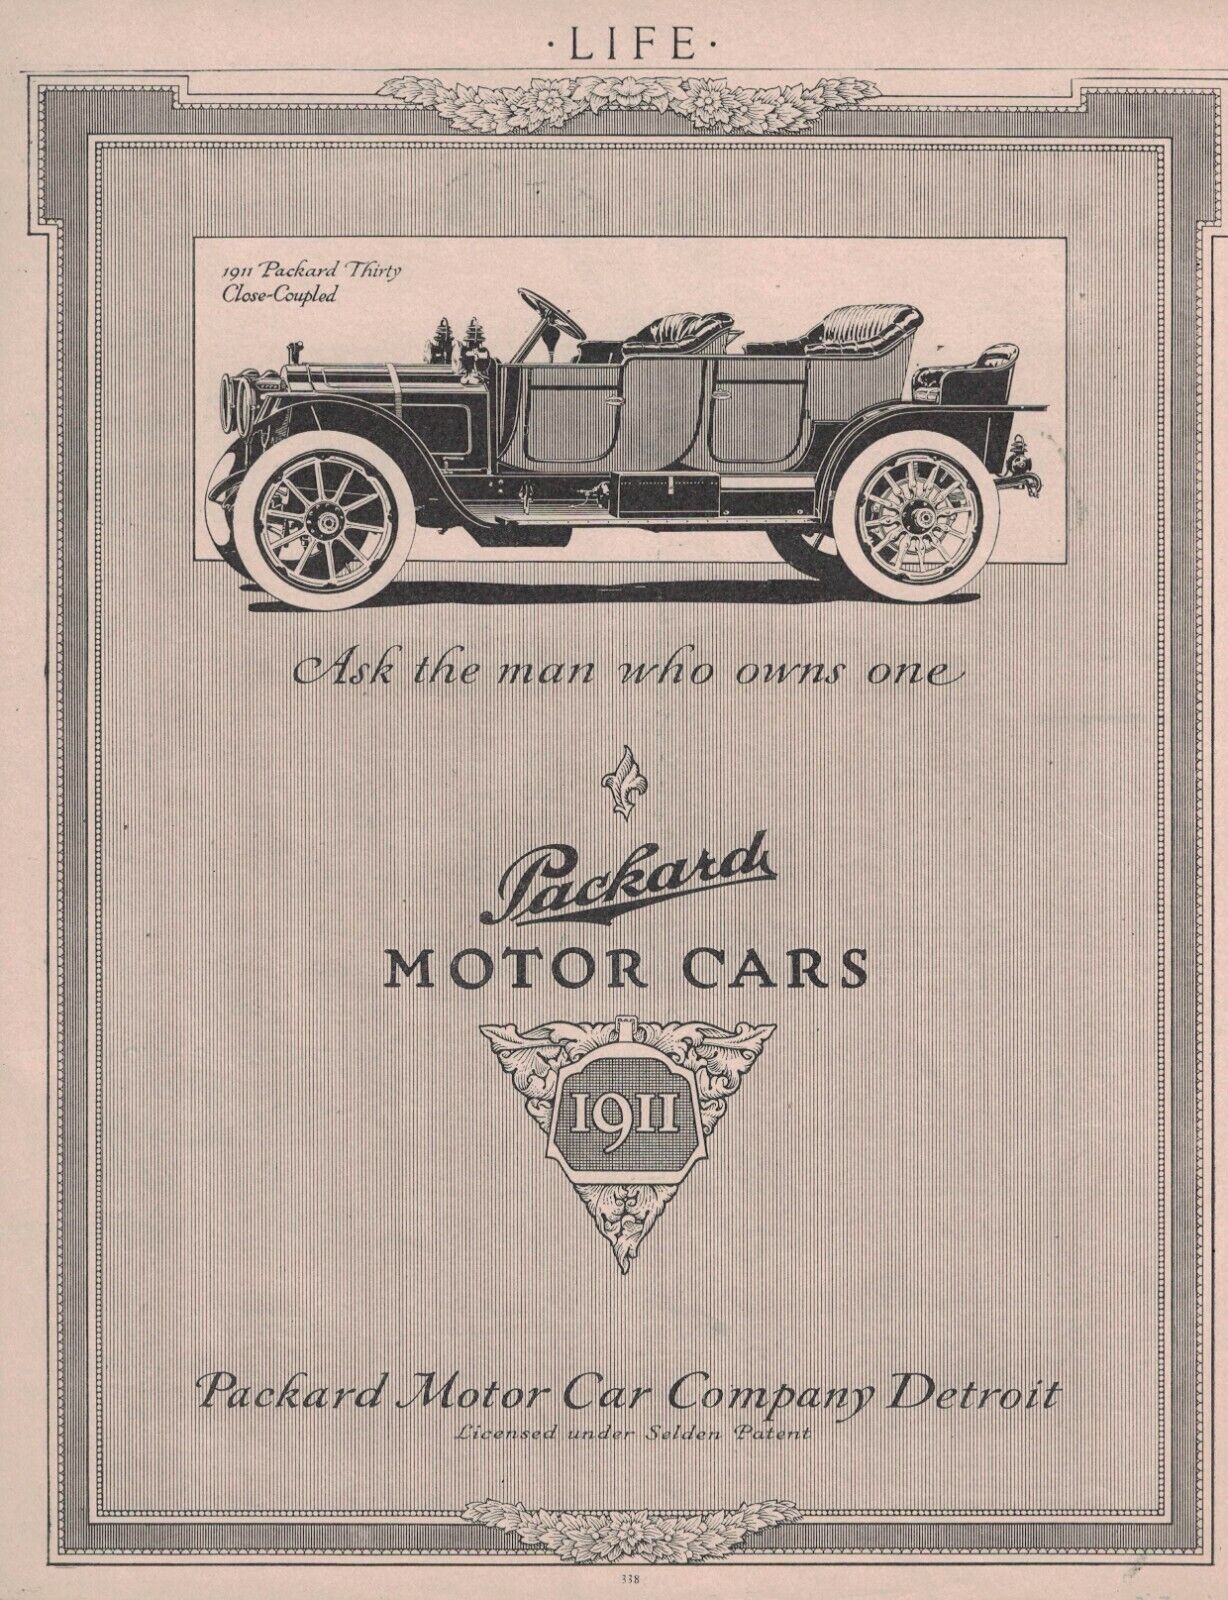 1911 Packard Thirty Close-Coupled Original ad from LIFE - Rare